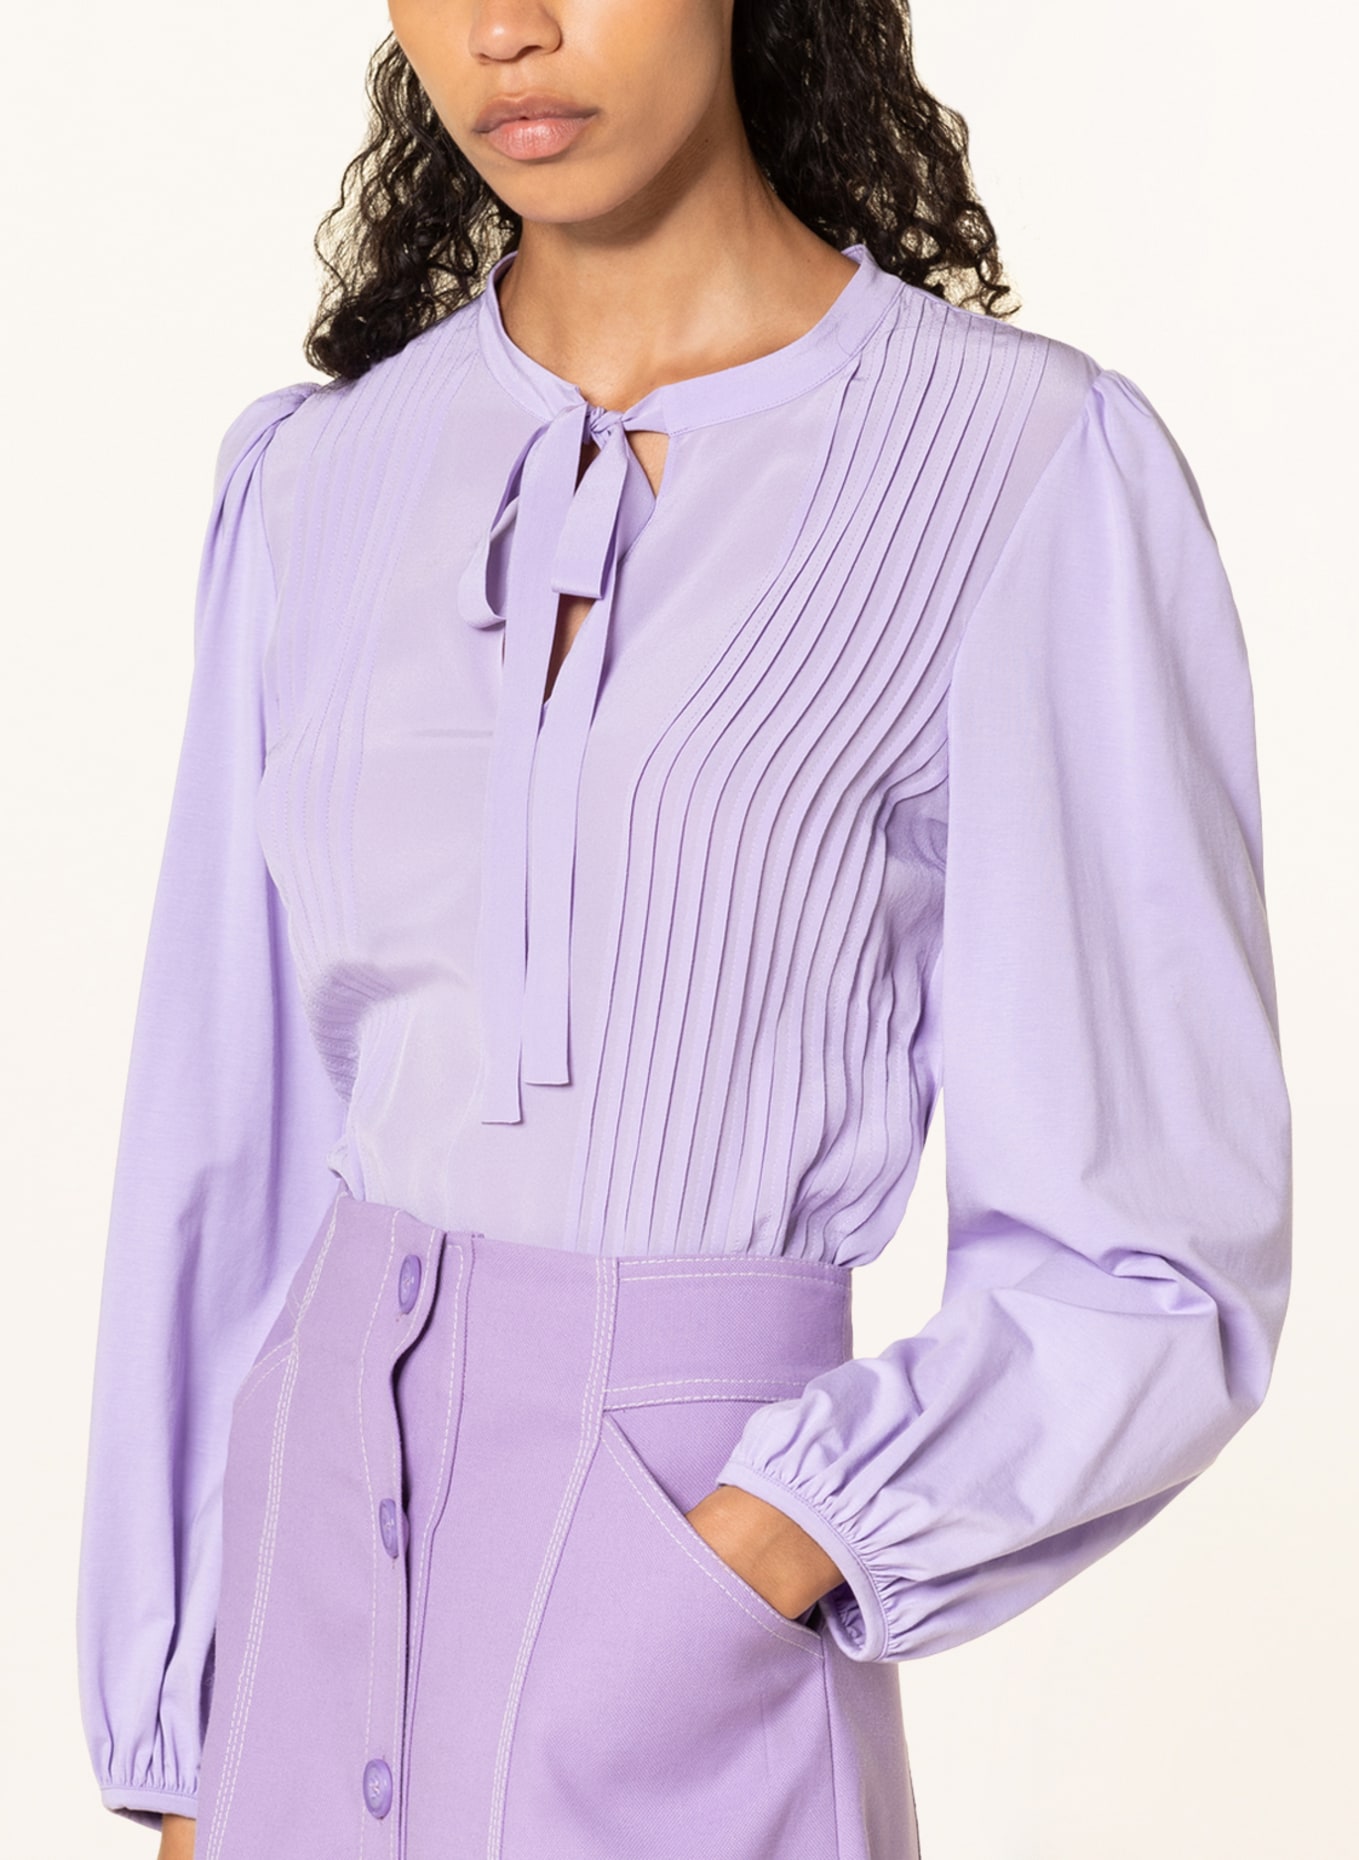 DOROTHEE SCHUMACHER Blouse in mixed materials , Color: LIGHT PURPLE (Image 4)